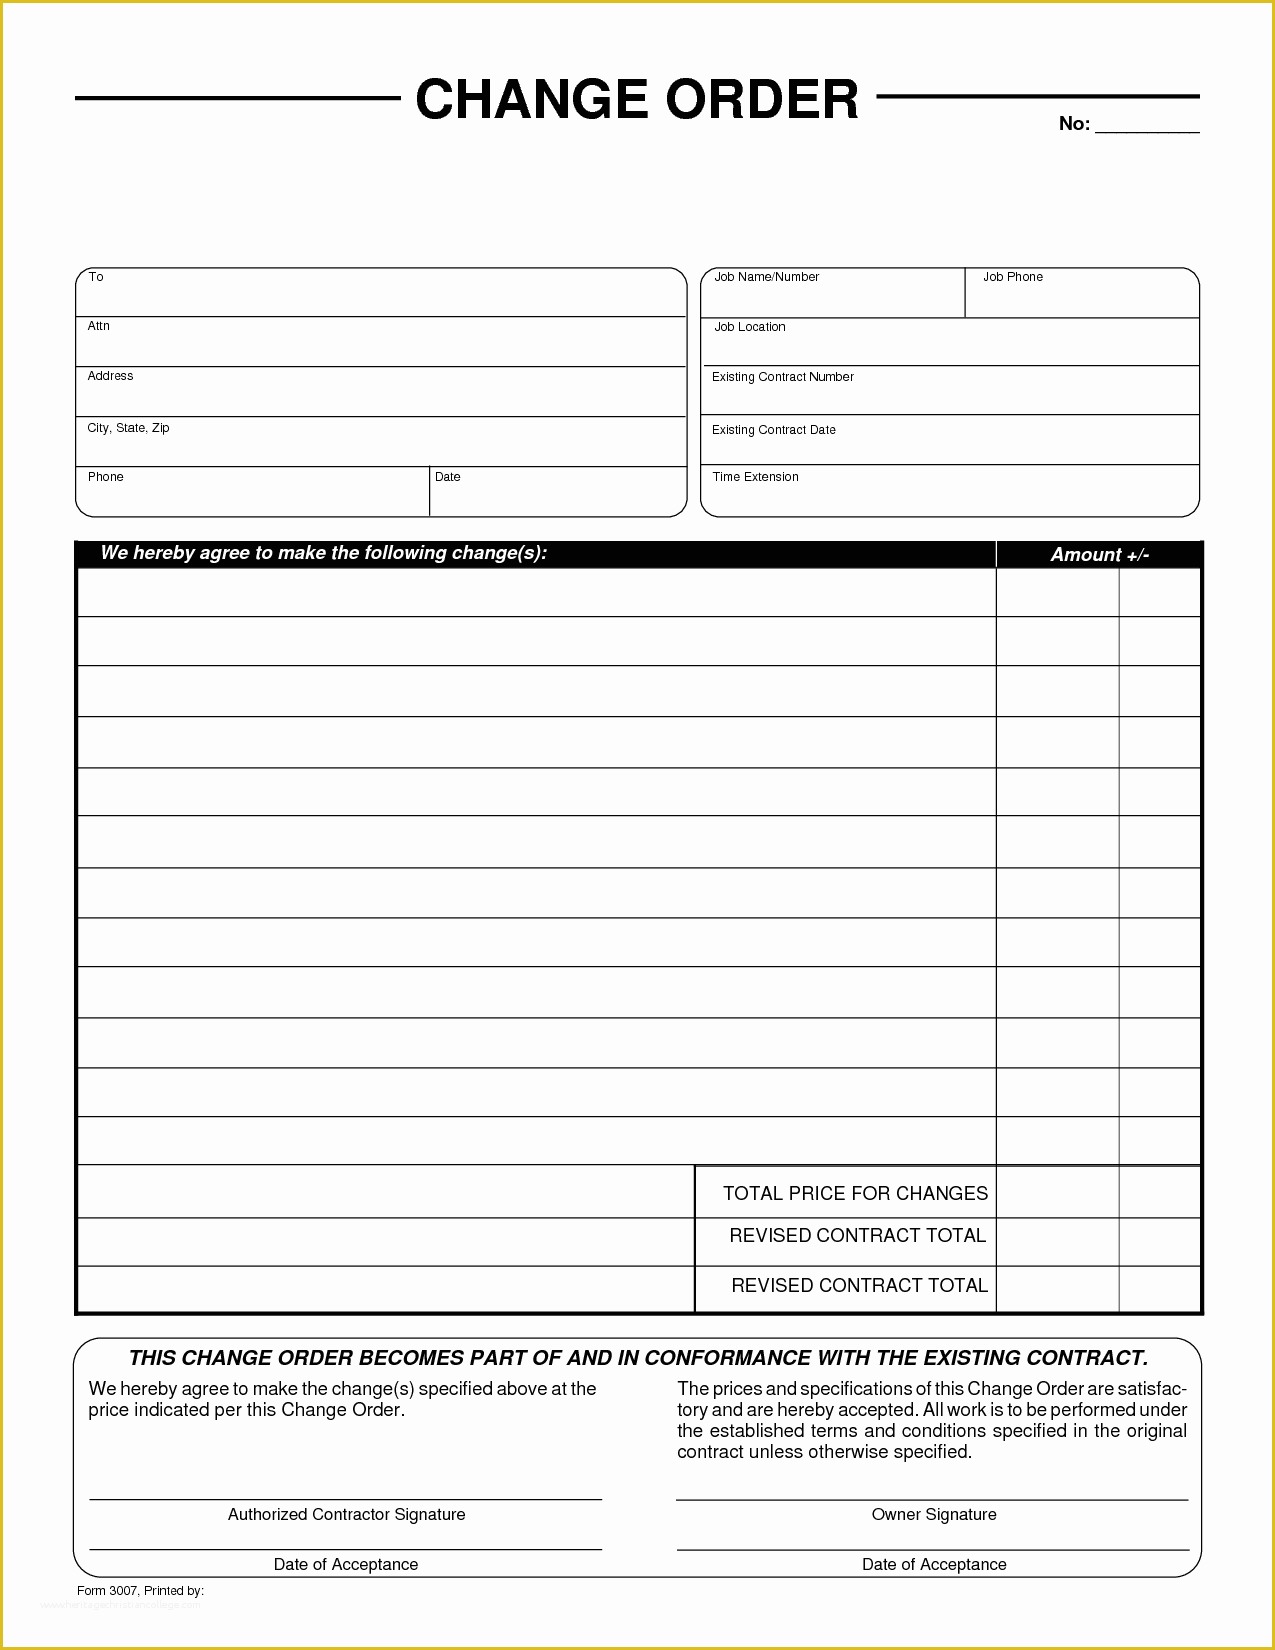 Picture order form Template Free Of Change Of order form by Liferetreat Change order form